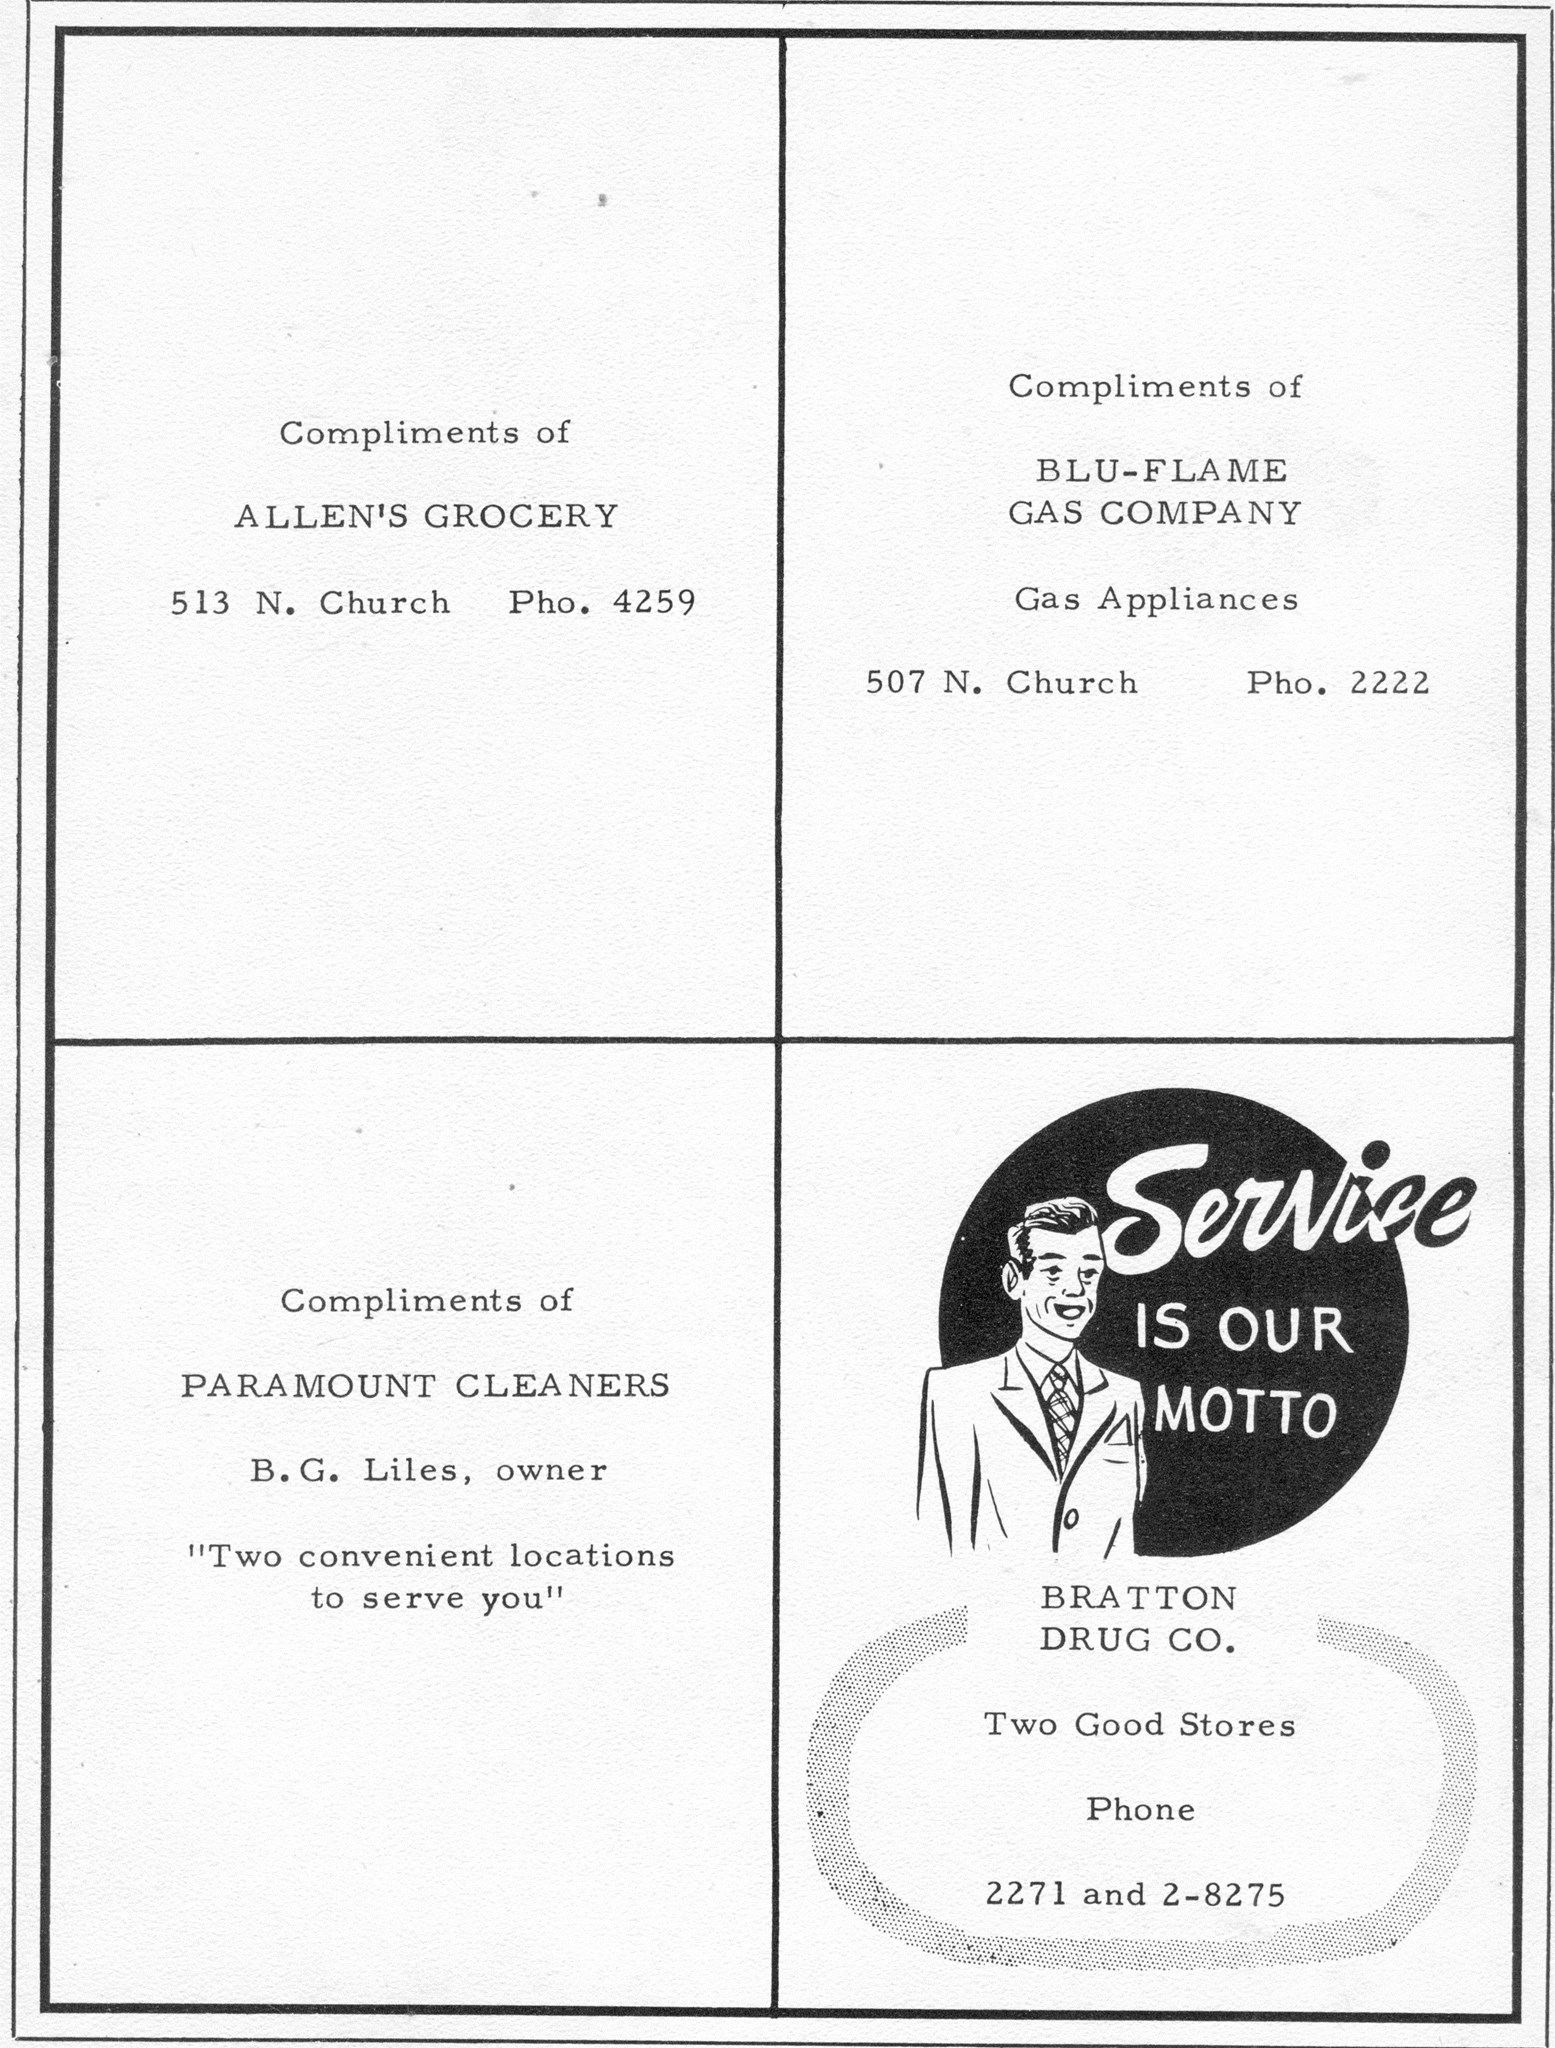 ../../../Images/Large/1952/Arclight-1952-pg0147.jpg